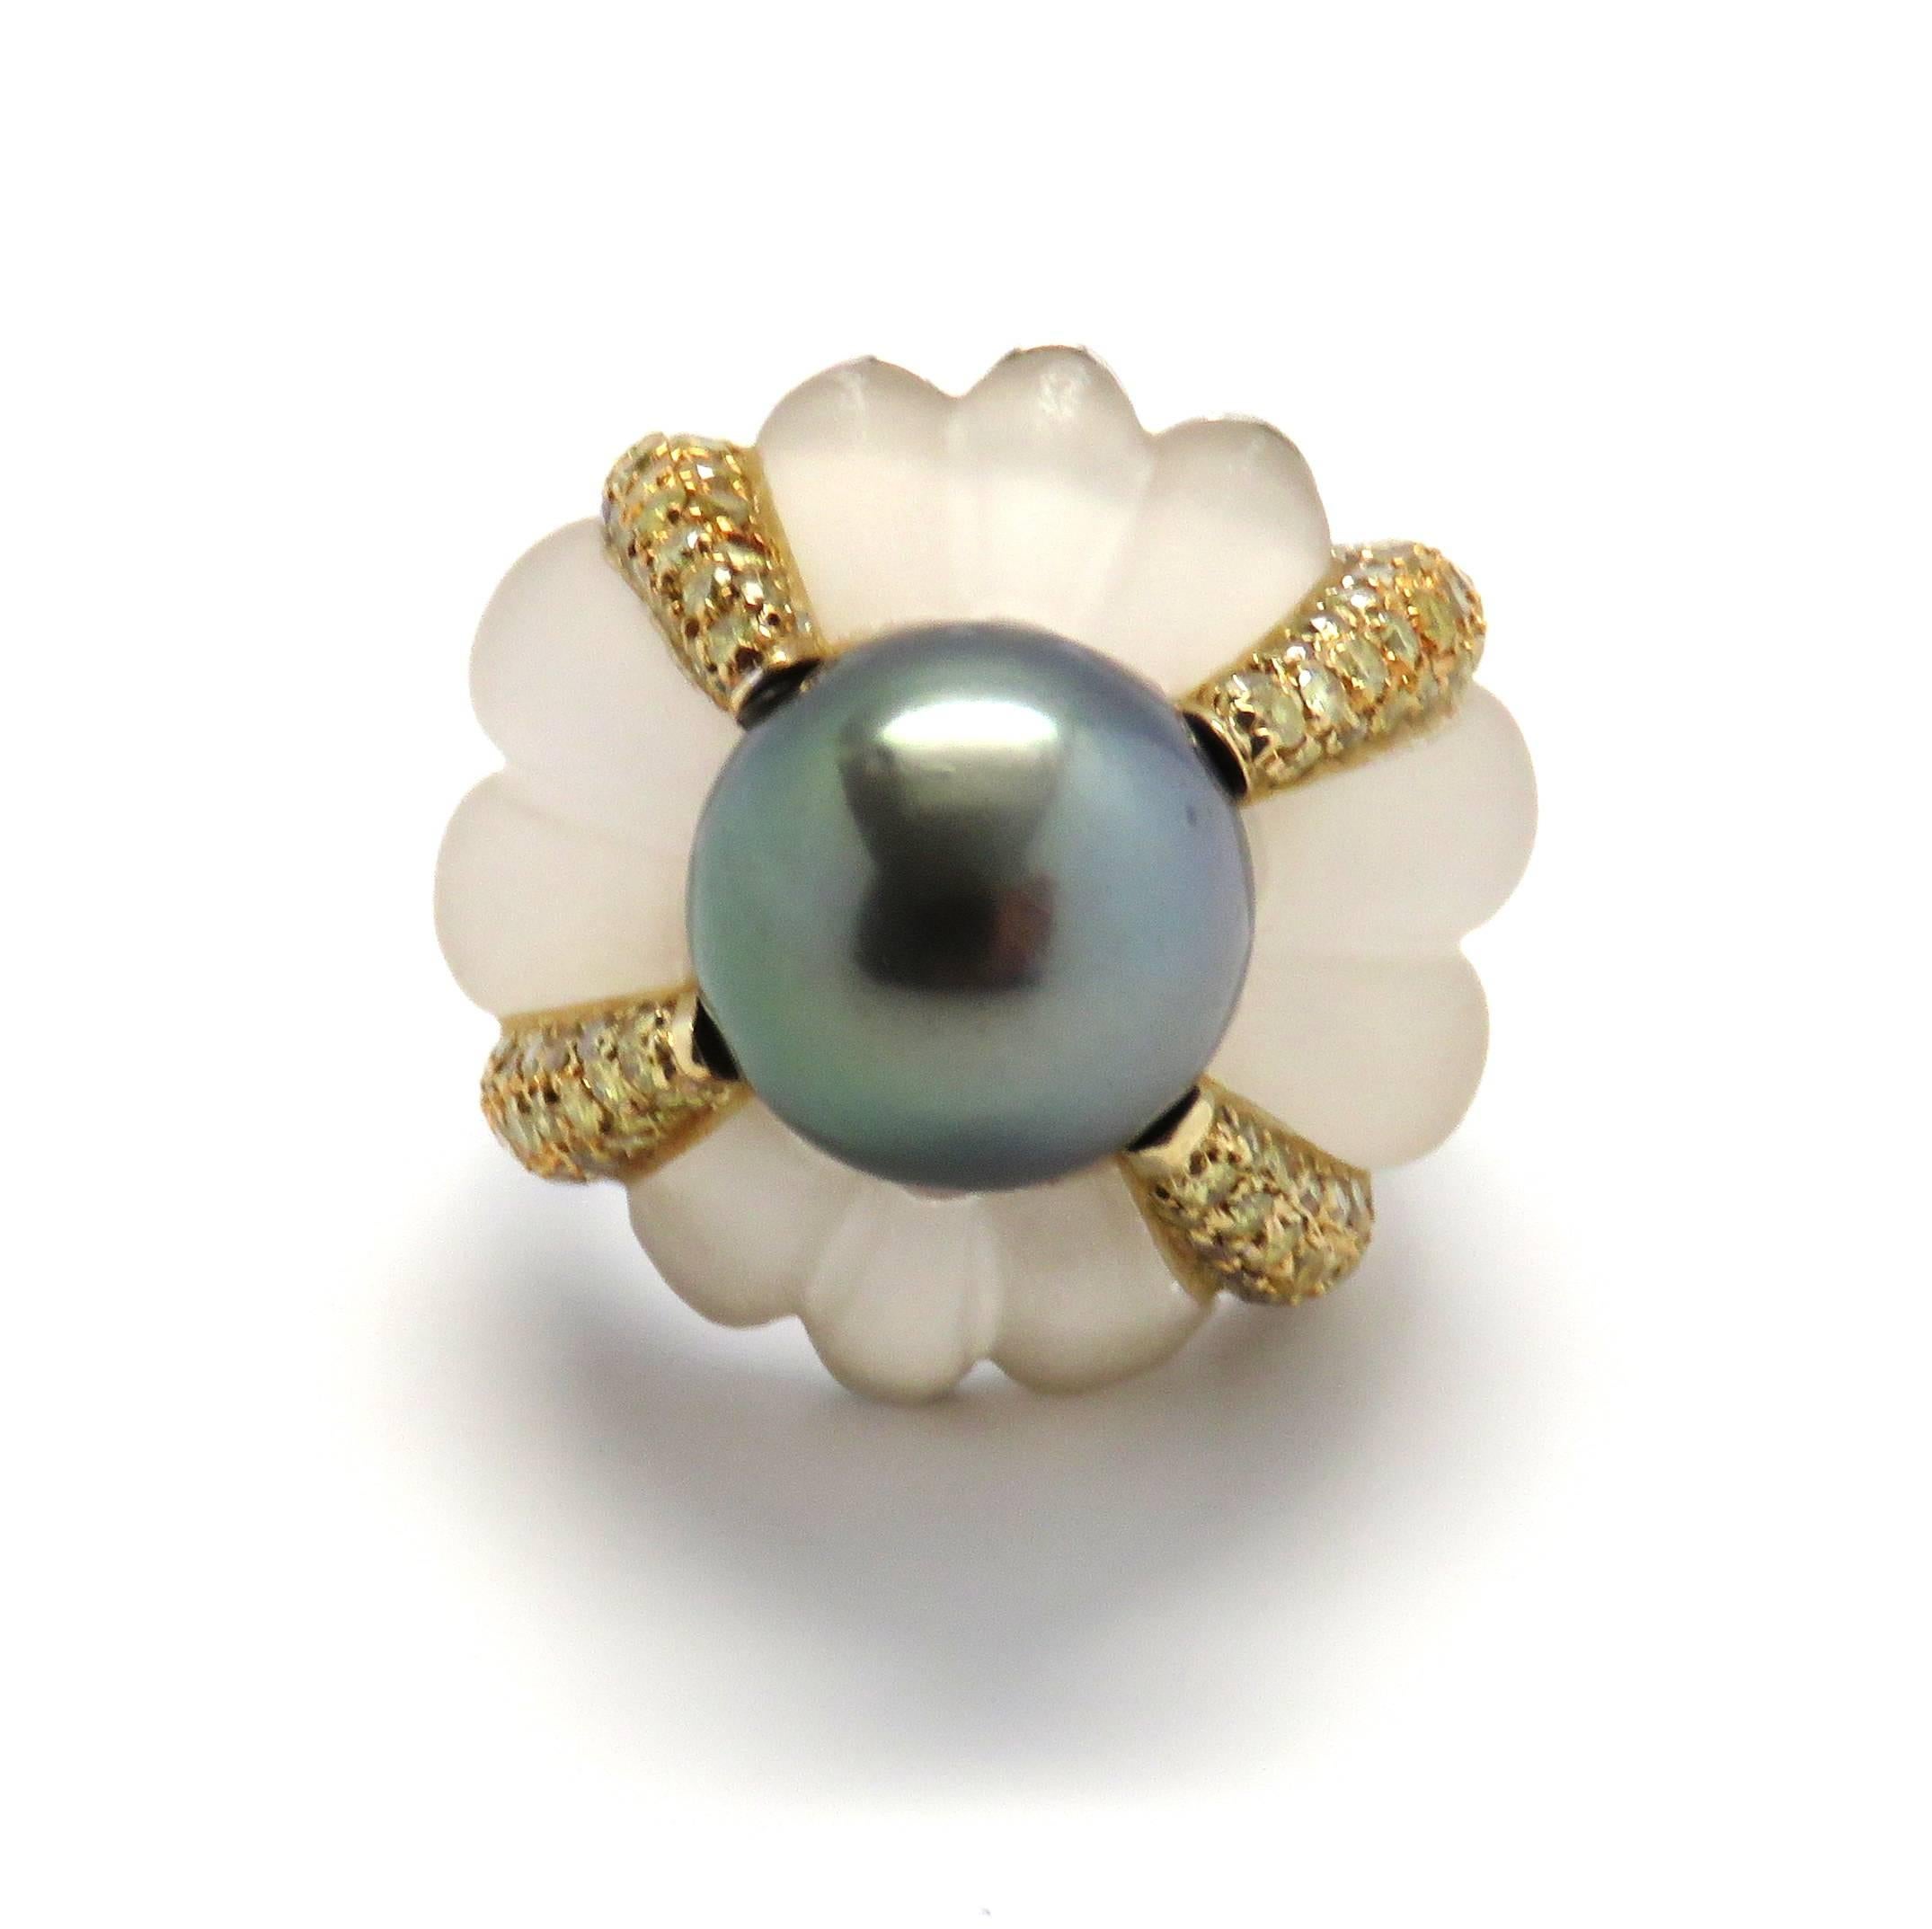 An 18k white gold ring adorned with rock crystal crafted by Salavetti, fancy color diamonds and a 12.7mm Tahitian pearl.  The ring is a size 6 and weighs 23.2 grams.  The top of the ring sits 16mm from the finger.